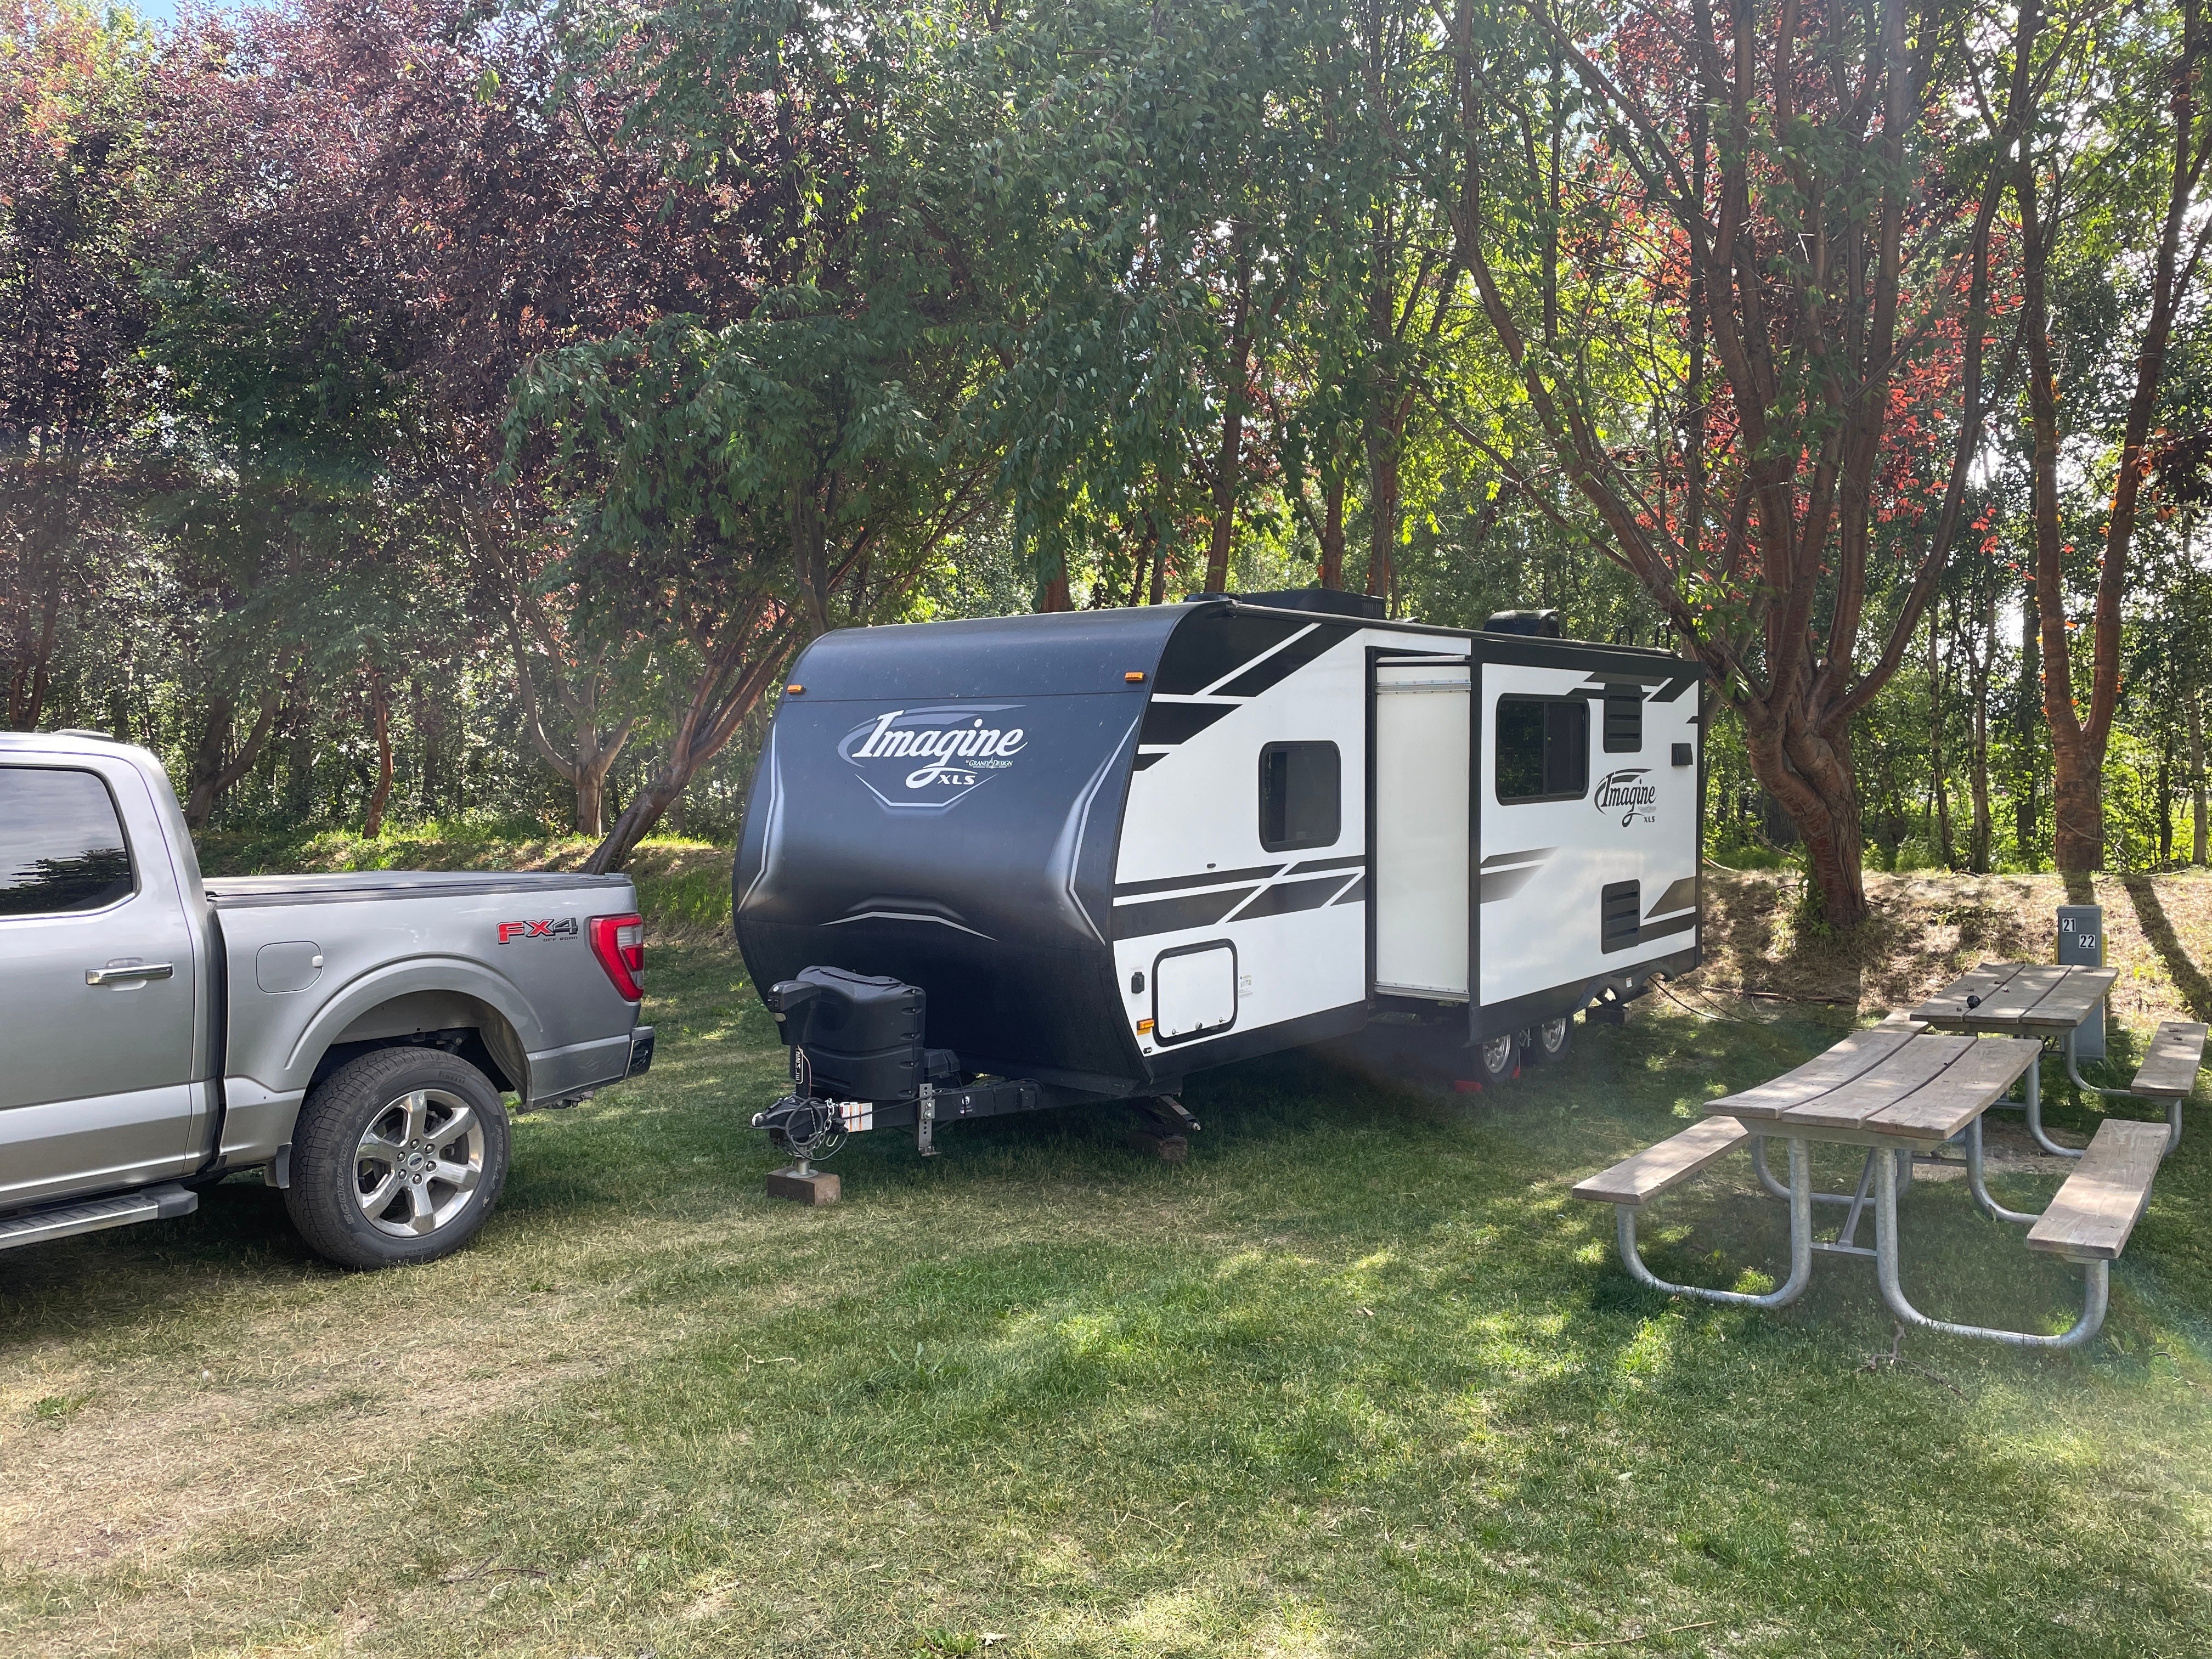 Camper submitted image from Matanuska River Park Campground - 1